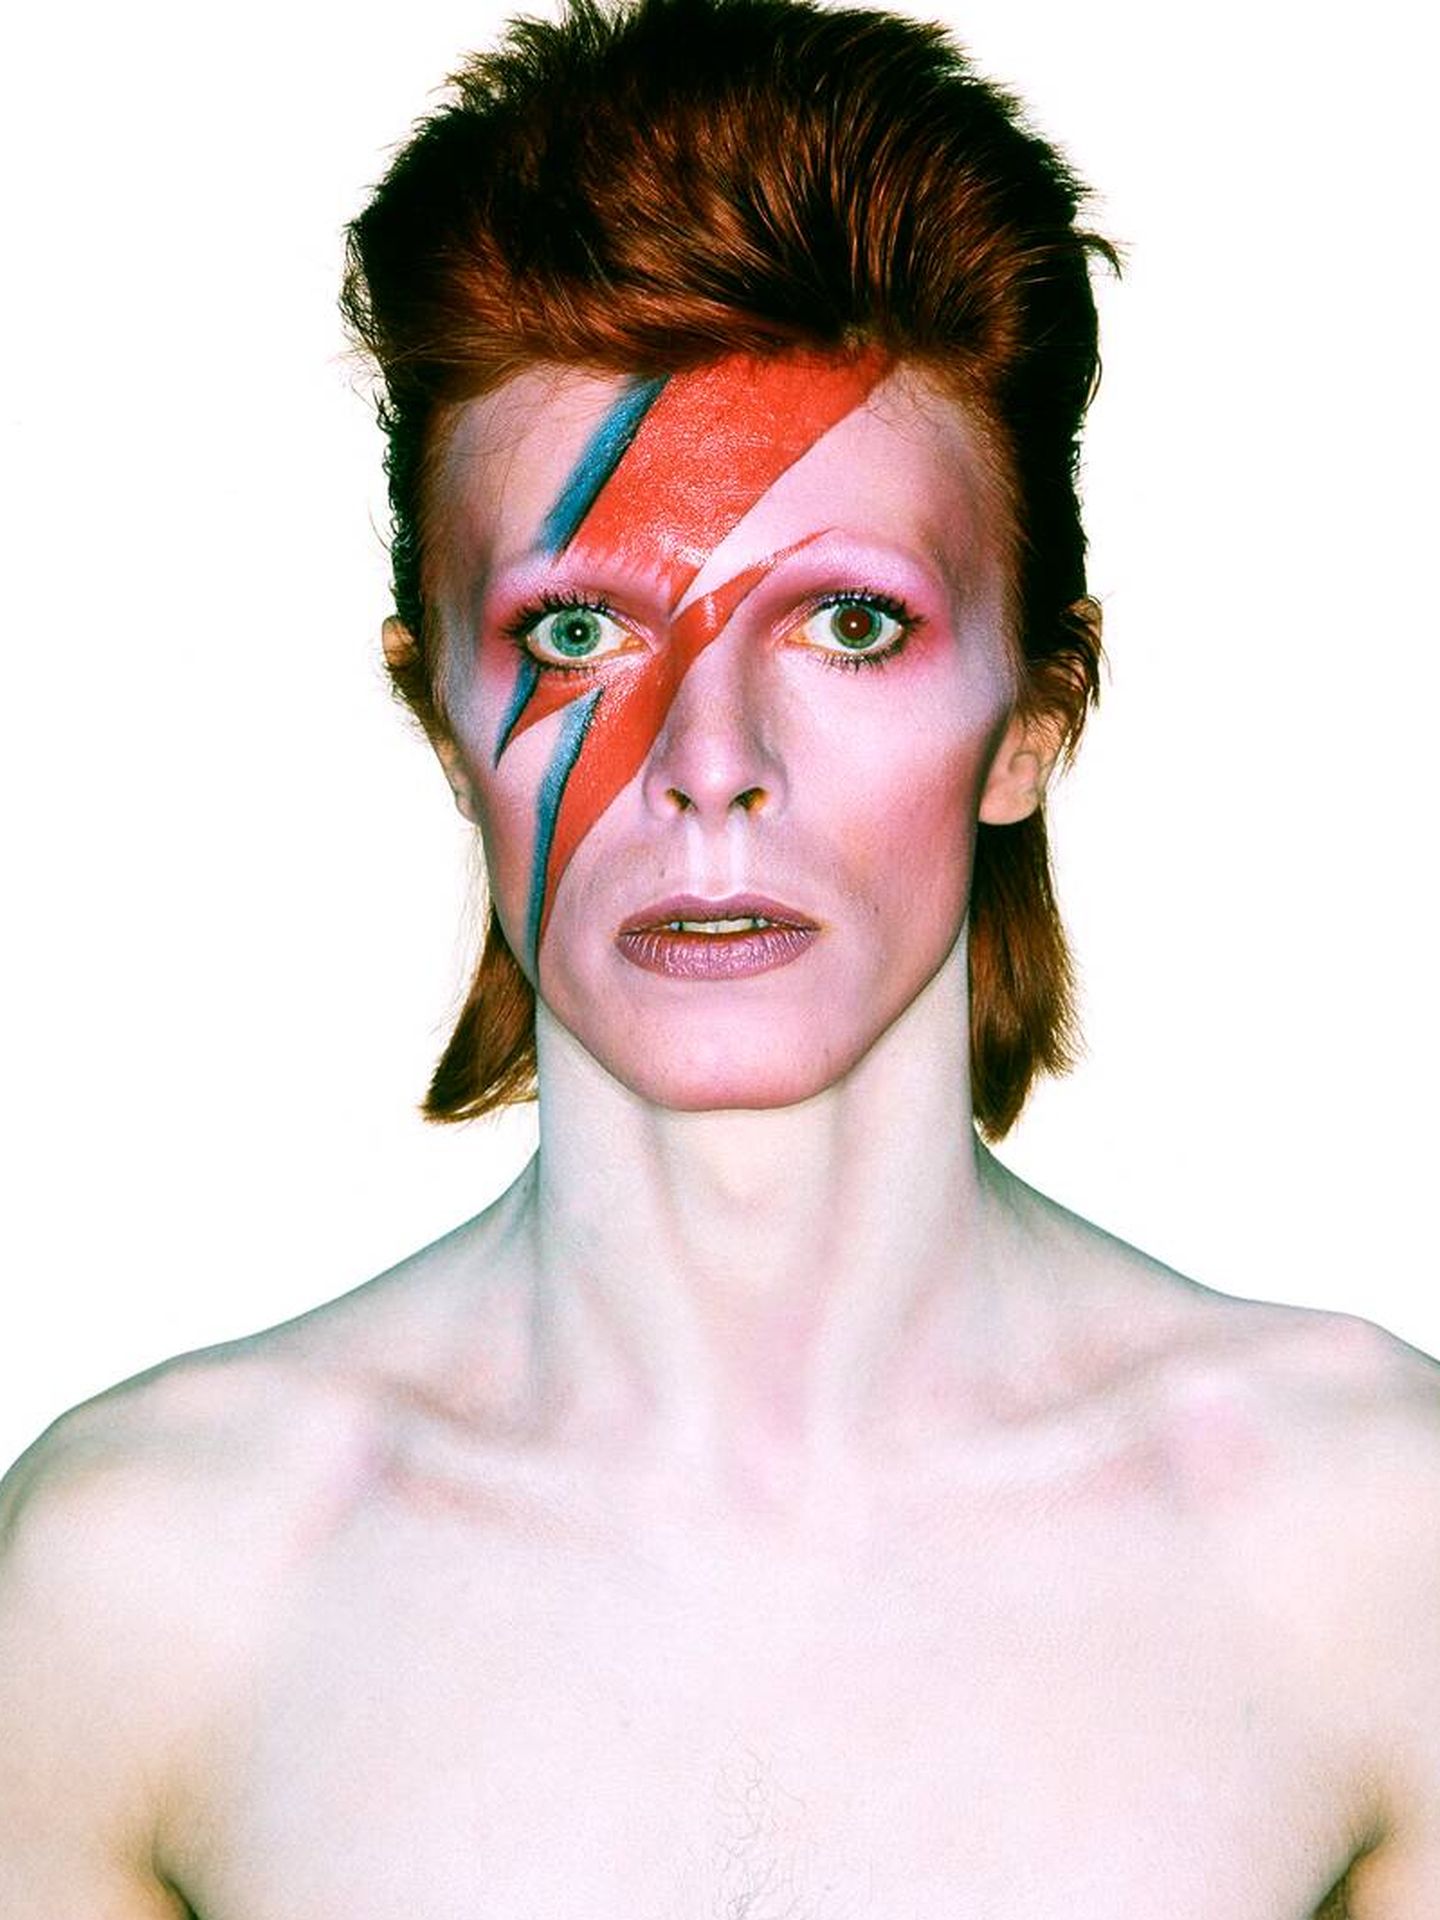 Aladdin Sane ‘Eyes Open’ 1973. (Photo Duffy © Duffy Archive & The David Bowie Archive™)